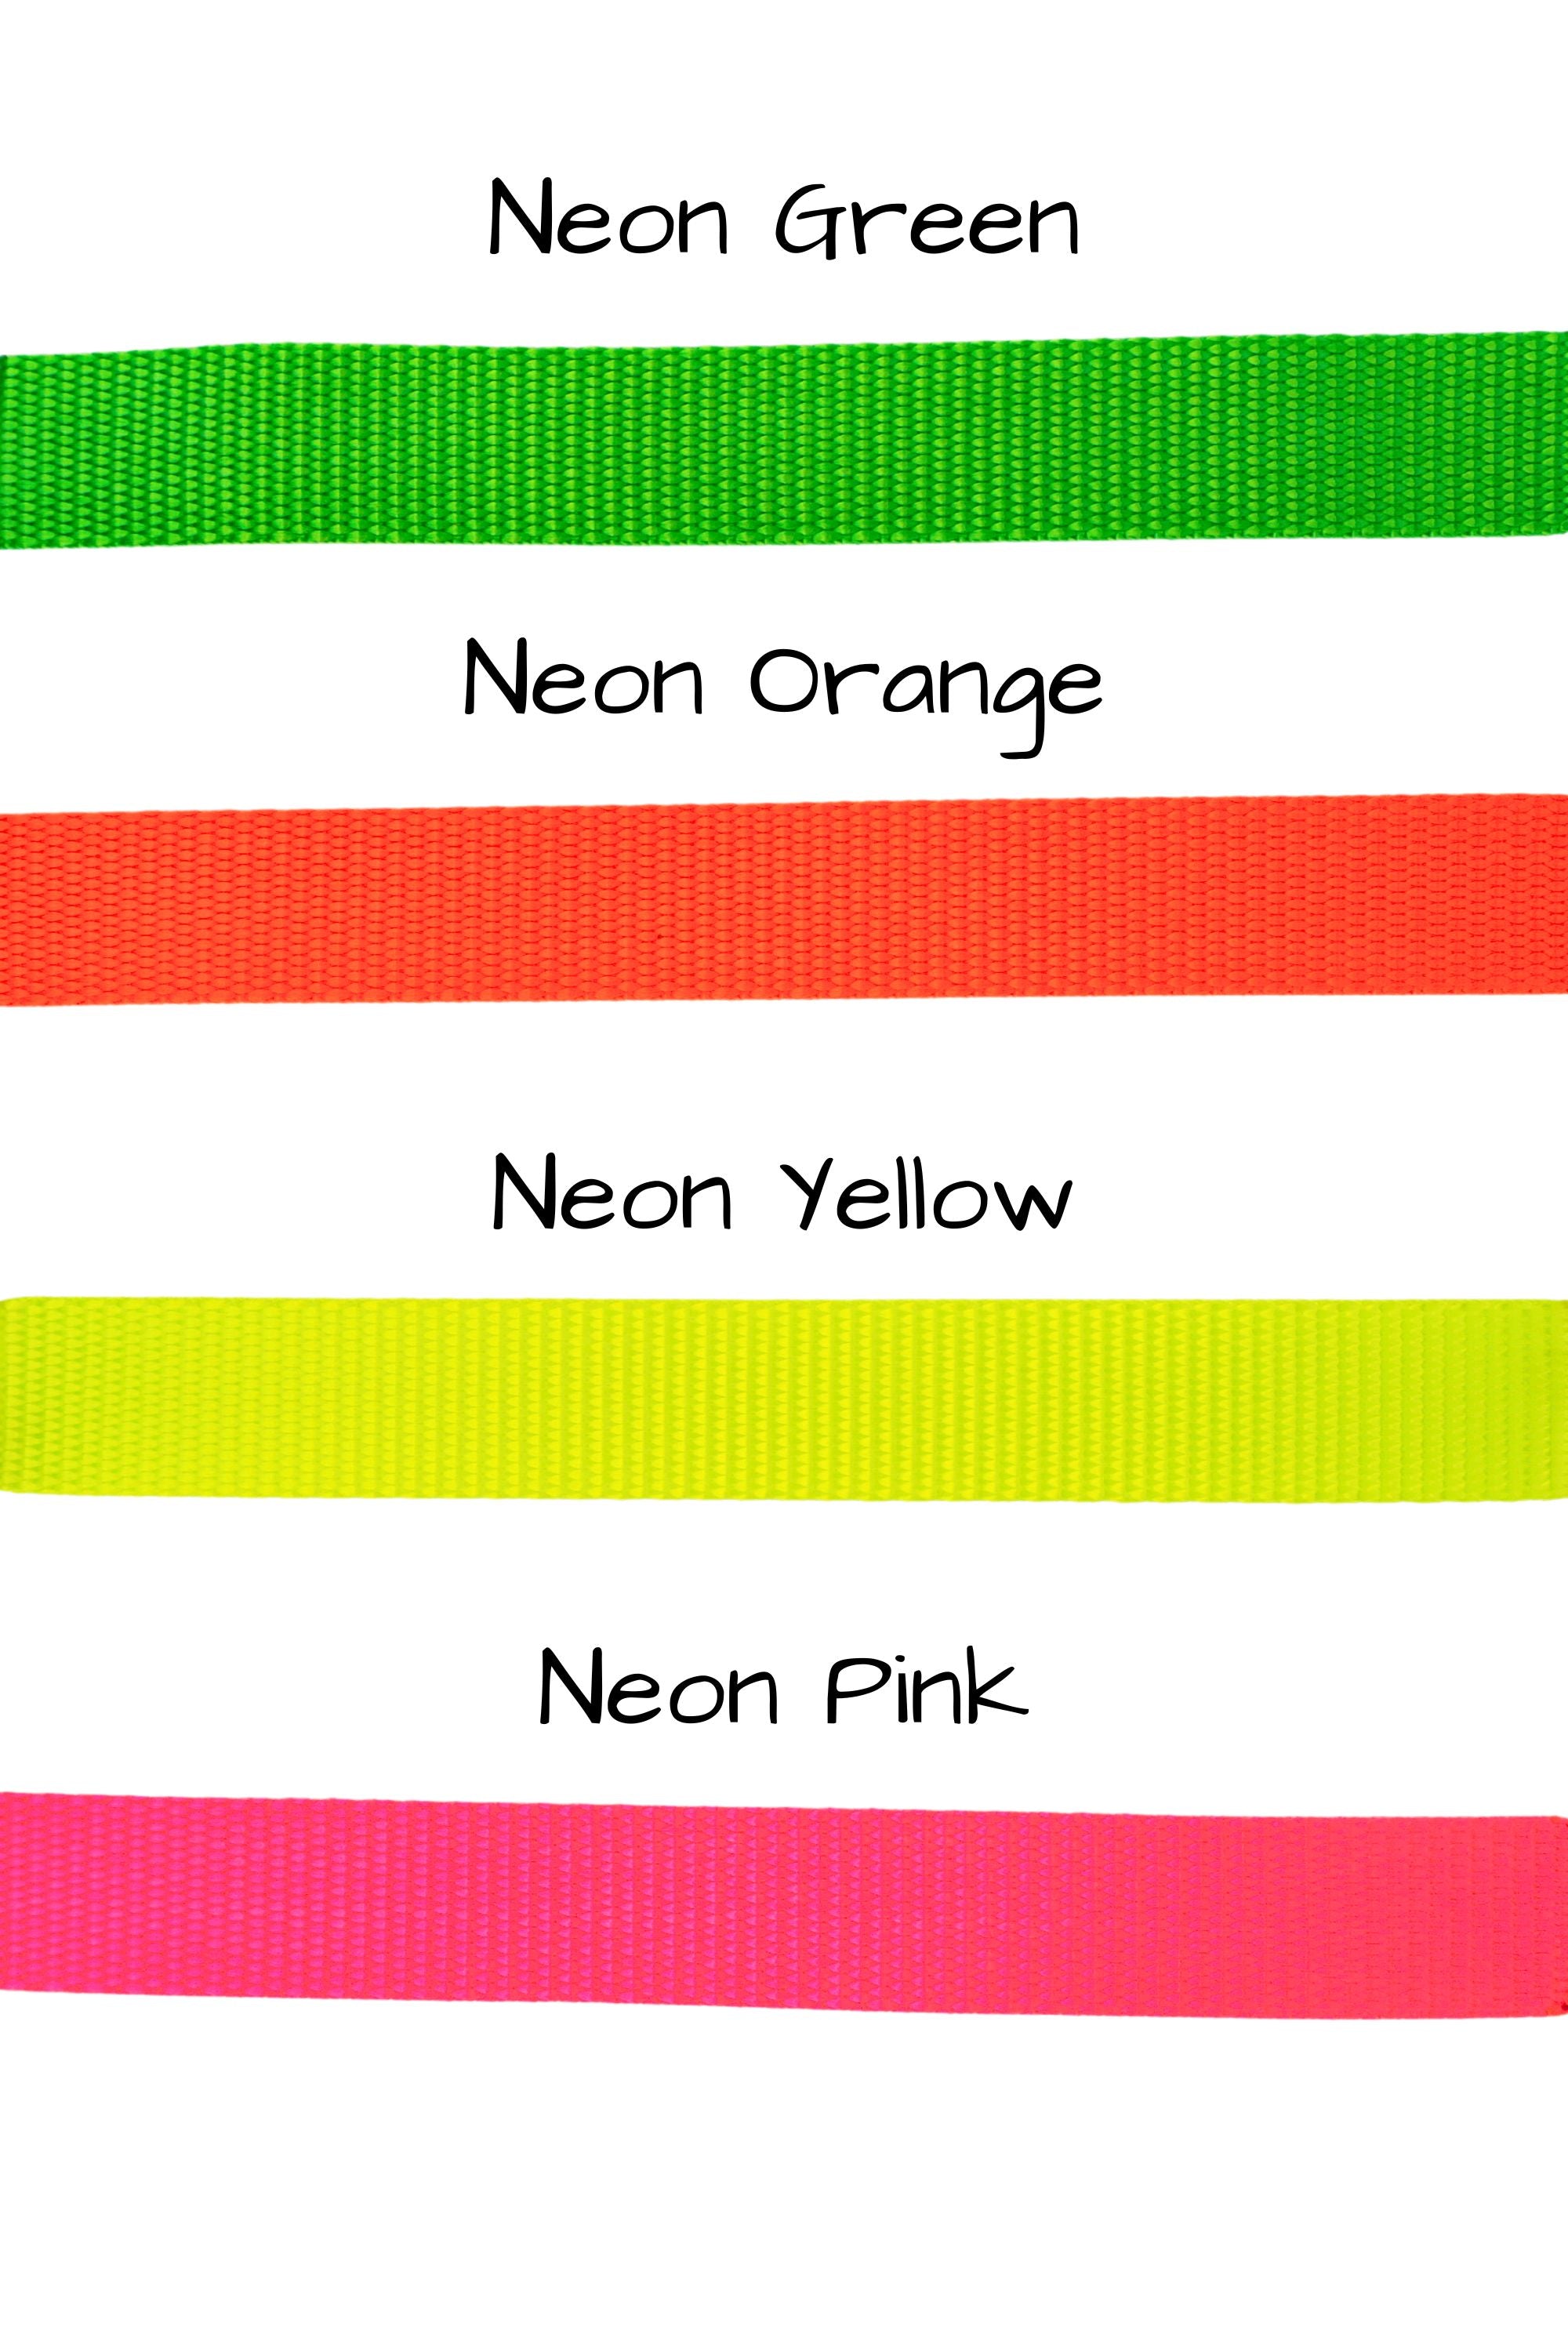 Four neon colors are available for the adjustable no-pull leashes, including neon green, neon orange, neon yellow, or neon pink.